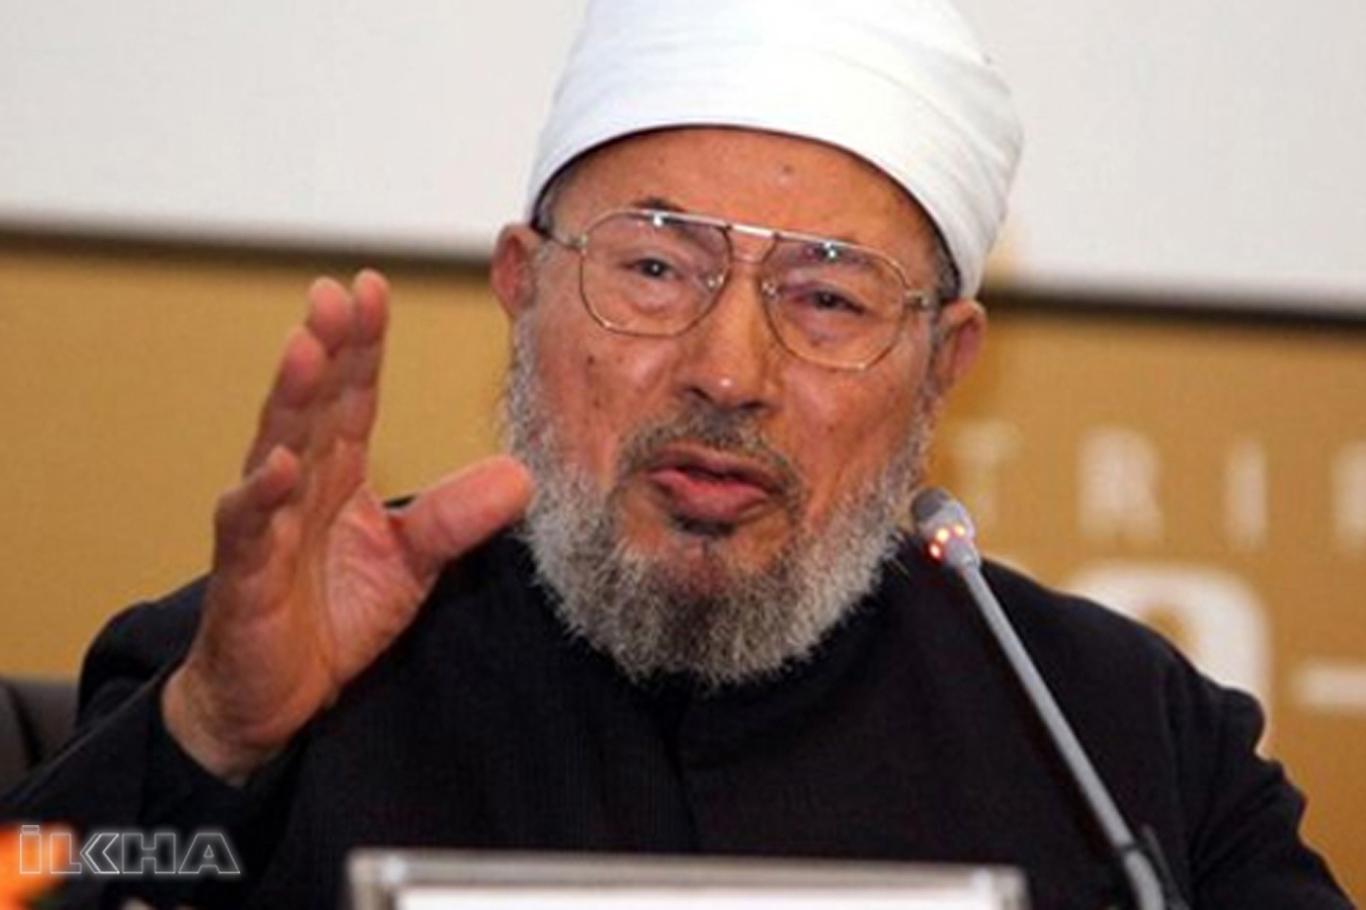 You cannot jail my thought even for an hour: Yusuf al-Qaradawi